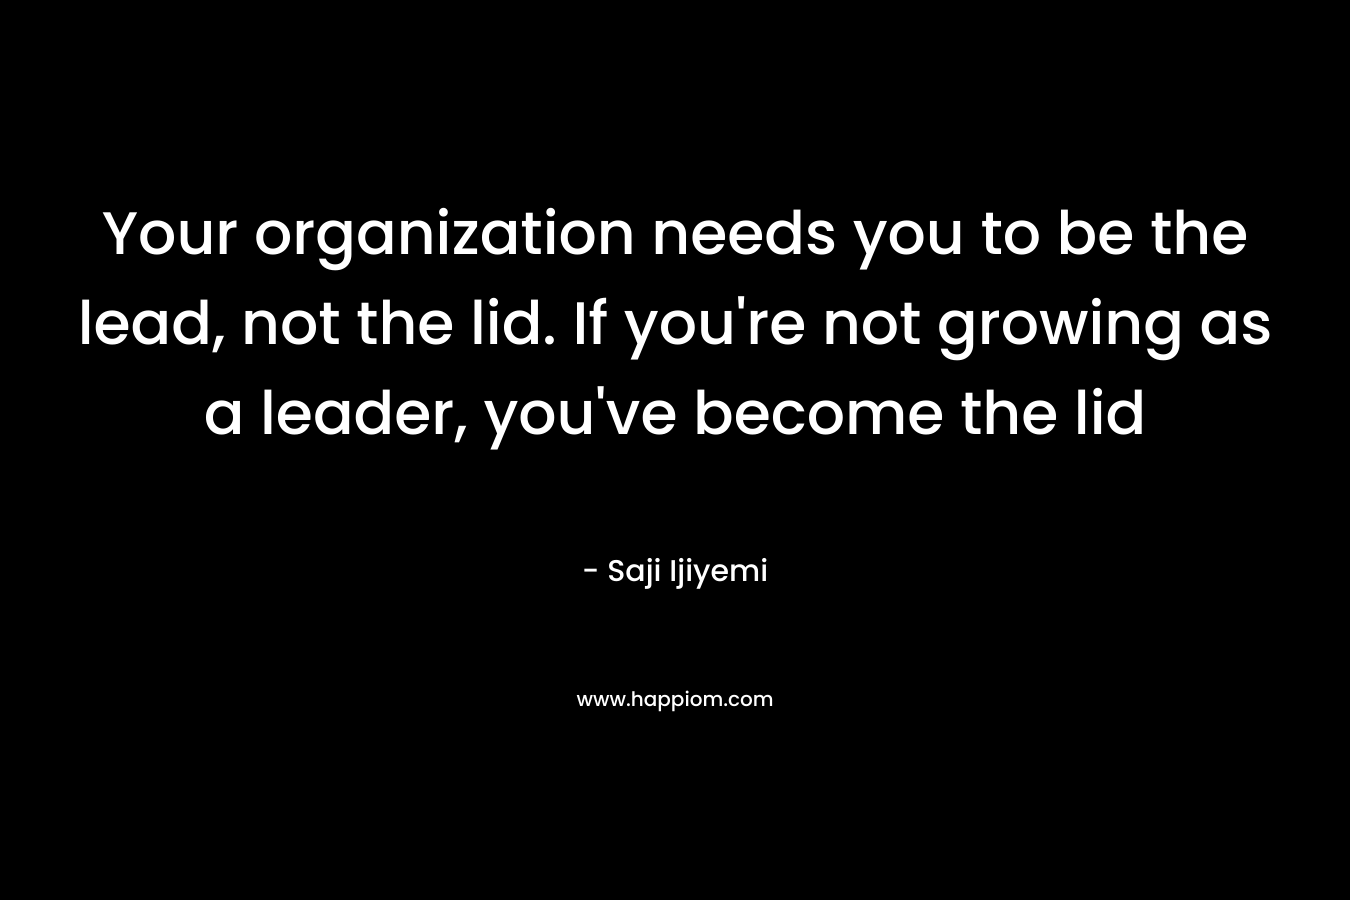 Your organization needs you to be the lead, not the lid. If you’re not growing as a leader, you’ve become the lid – Saji Ijiyemi